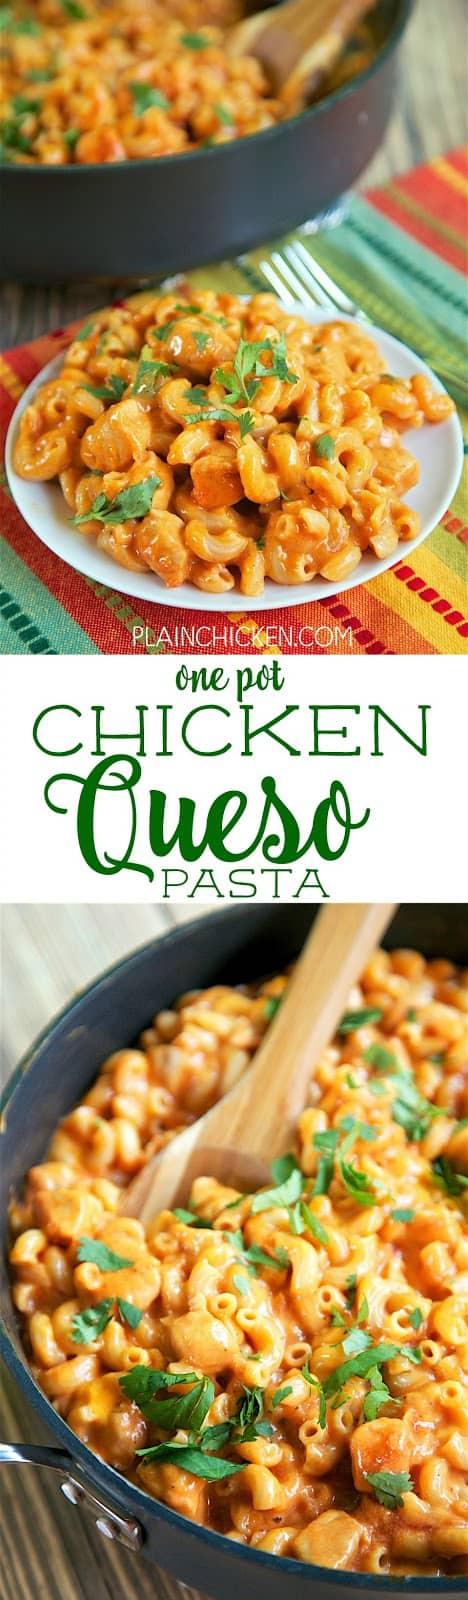 One Pot Chicken Queso Pasta - everything cooks in the same pan, even the pasta! Only 6 ingredients! Chicken, taco seasoning, chicken broth, salsa, pasta and velveeta. Everyone cleaned their plates! Quick, easy Mexican recipe that is ready in 20 minutes!